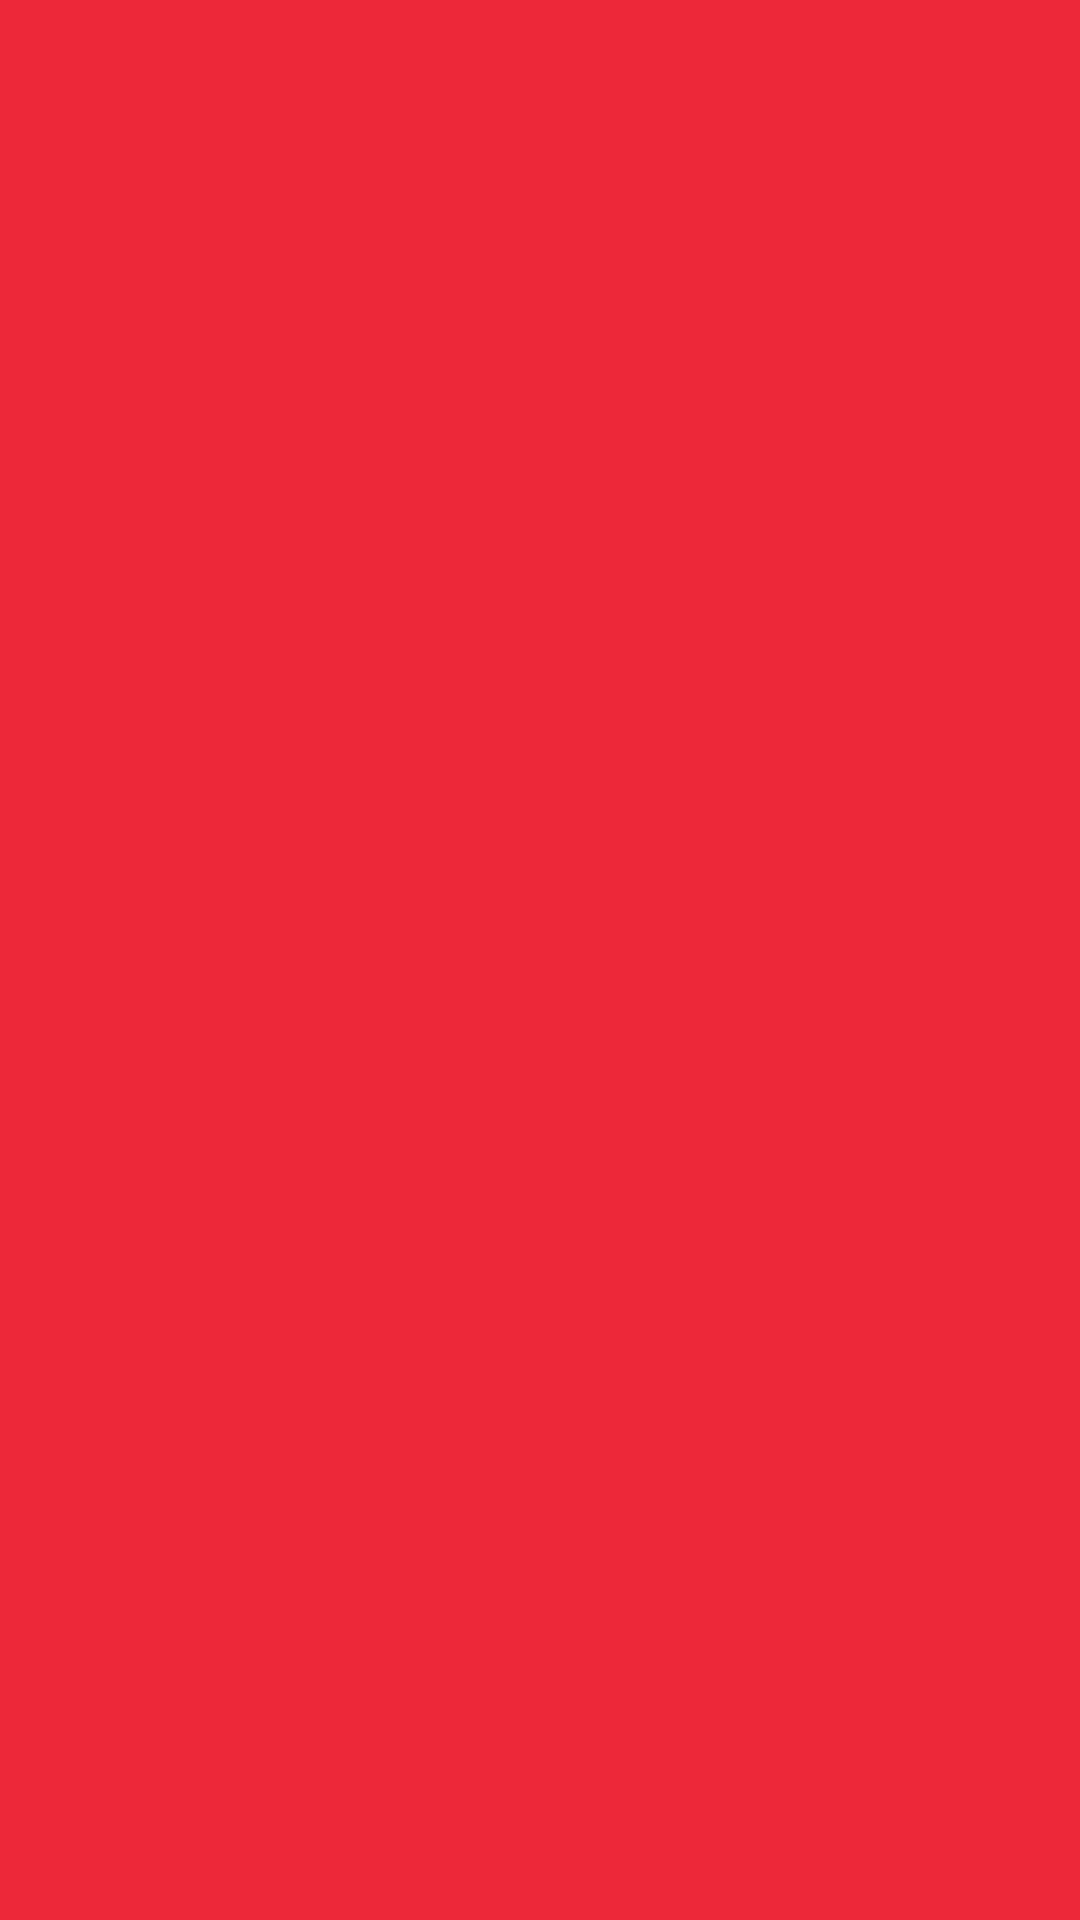 1080x1920 Red Pantone Solid Color Background